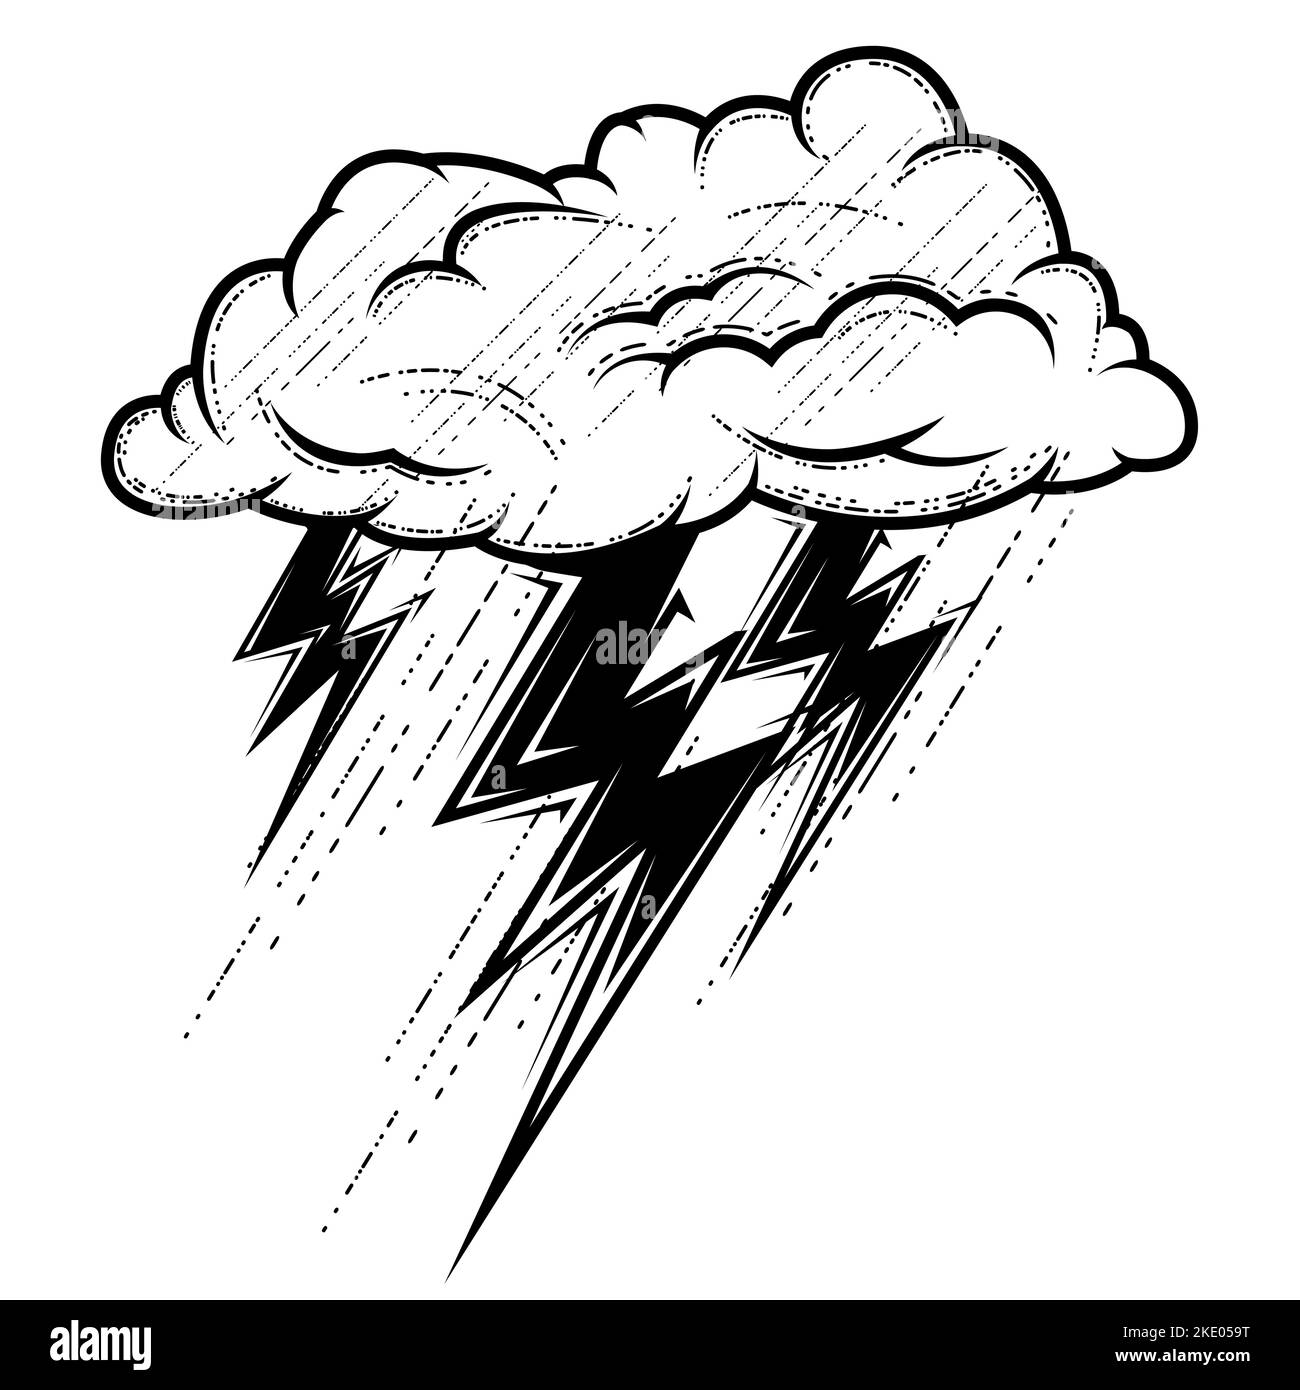 Thunderstorm Stock Vector Images - Alamy